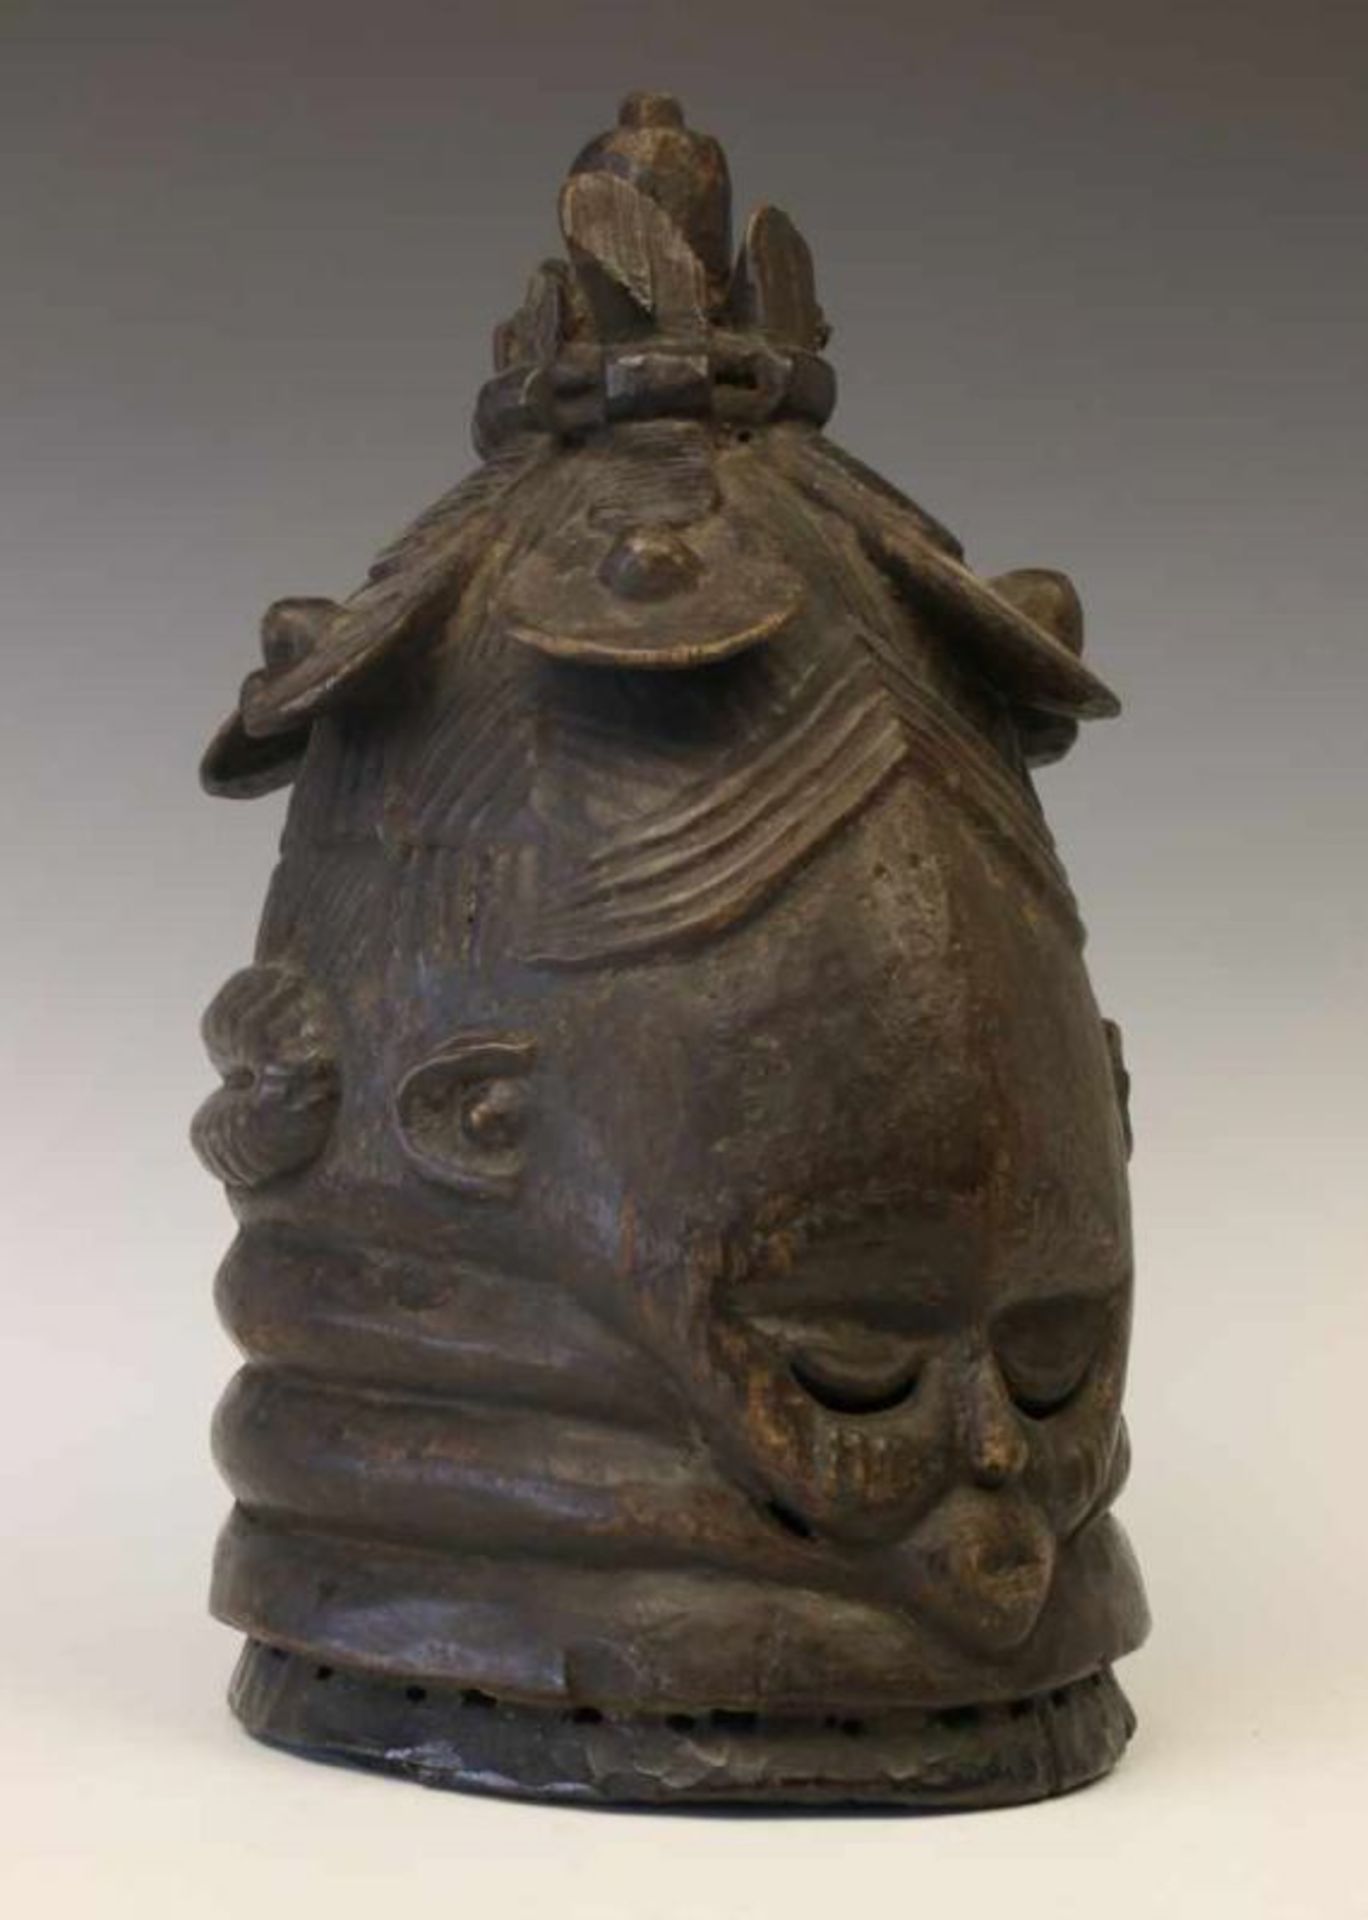 Siera Leone, Mende, Sowei mask,carved helmet mask with bound hair with seven tresses. With black